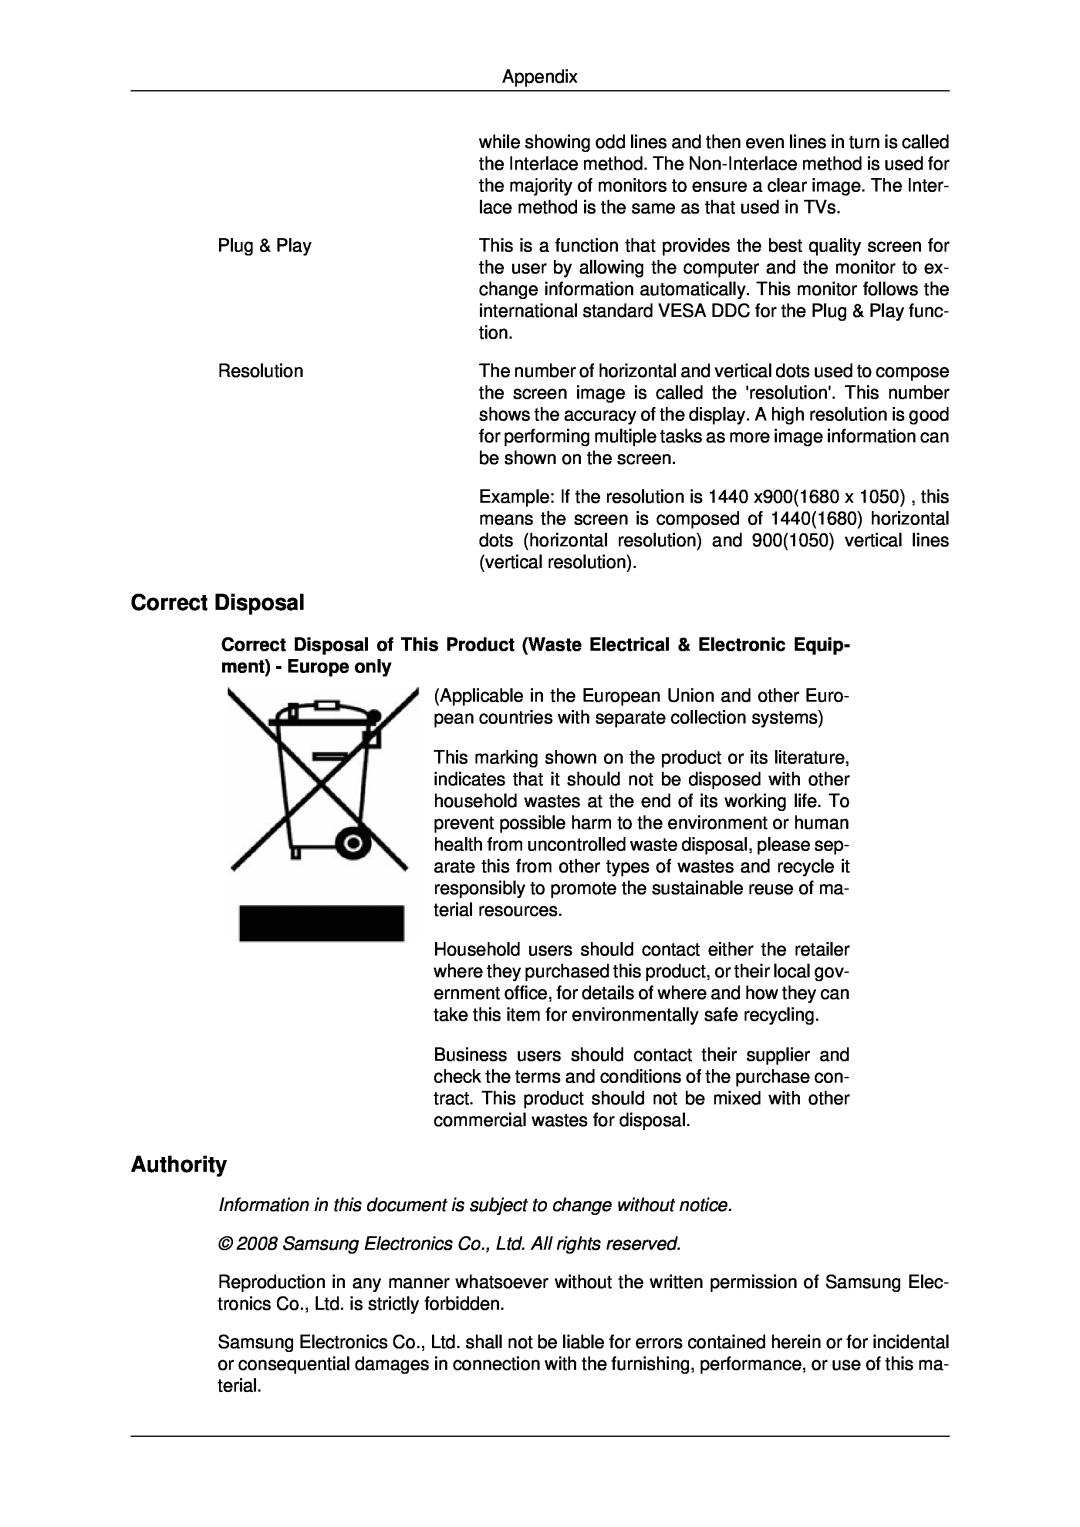 Samsung LS22MYDKBQ/XSH manual Correct Disposal, Authority, Information in this document is subject to change without notice 